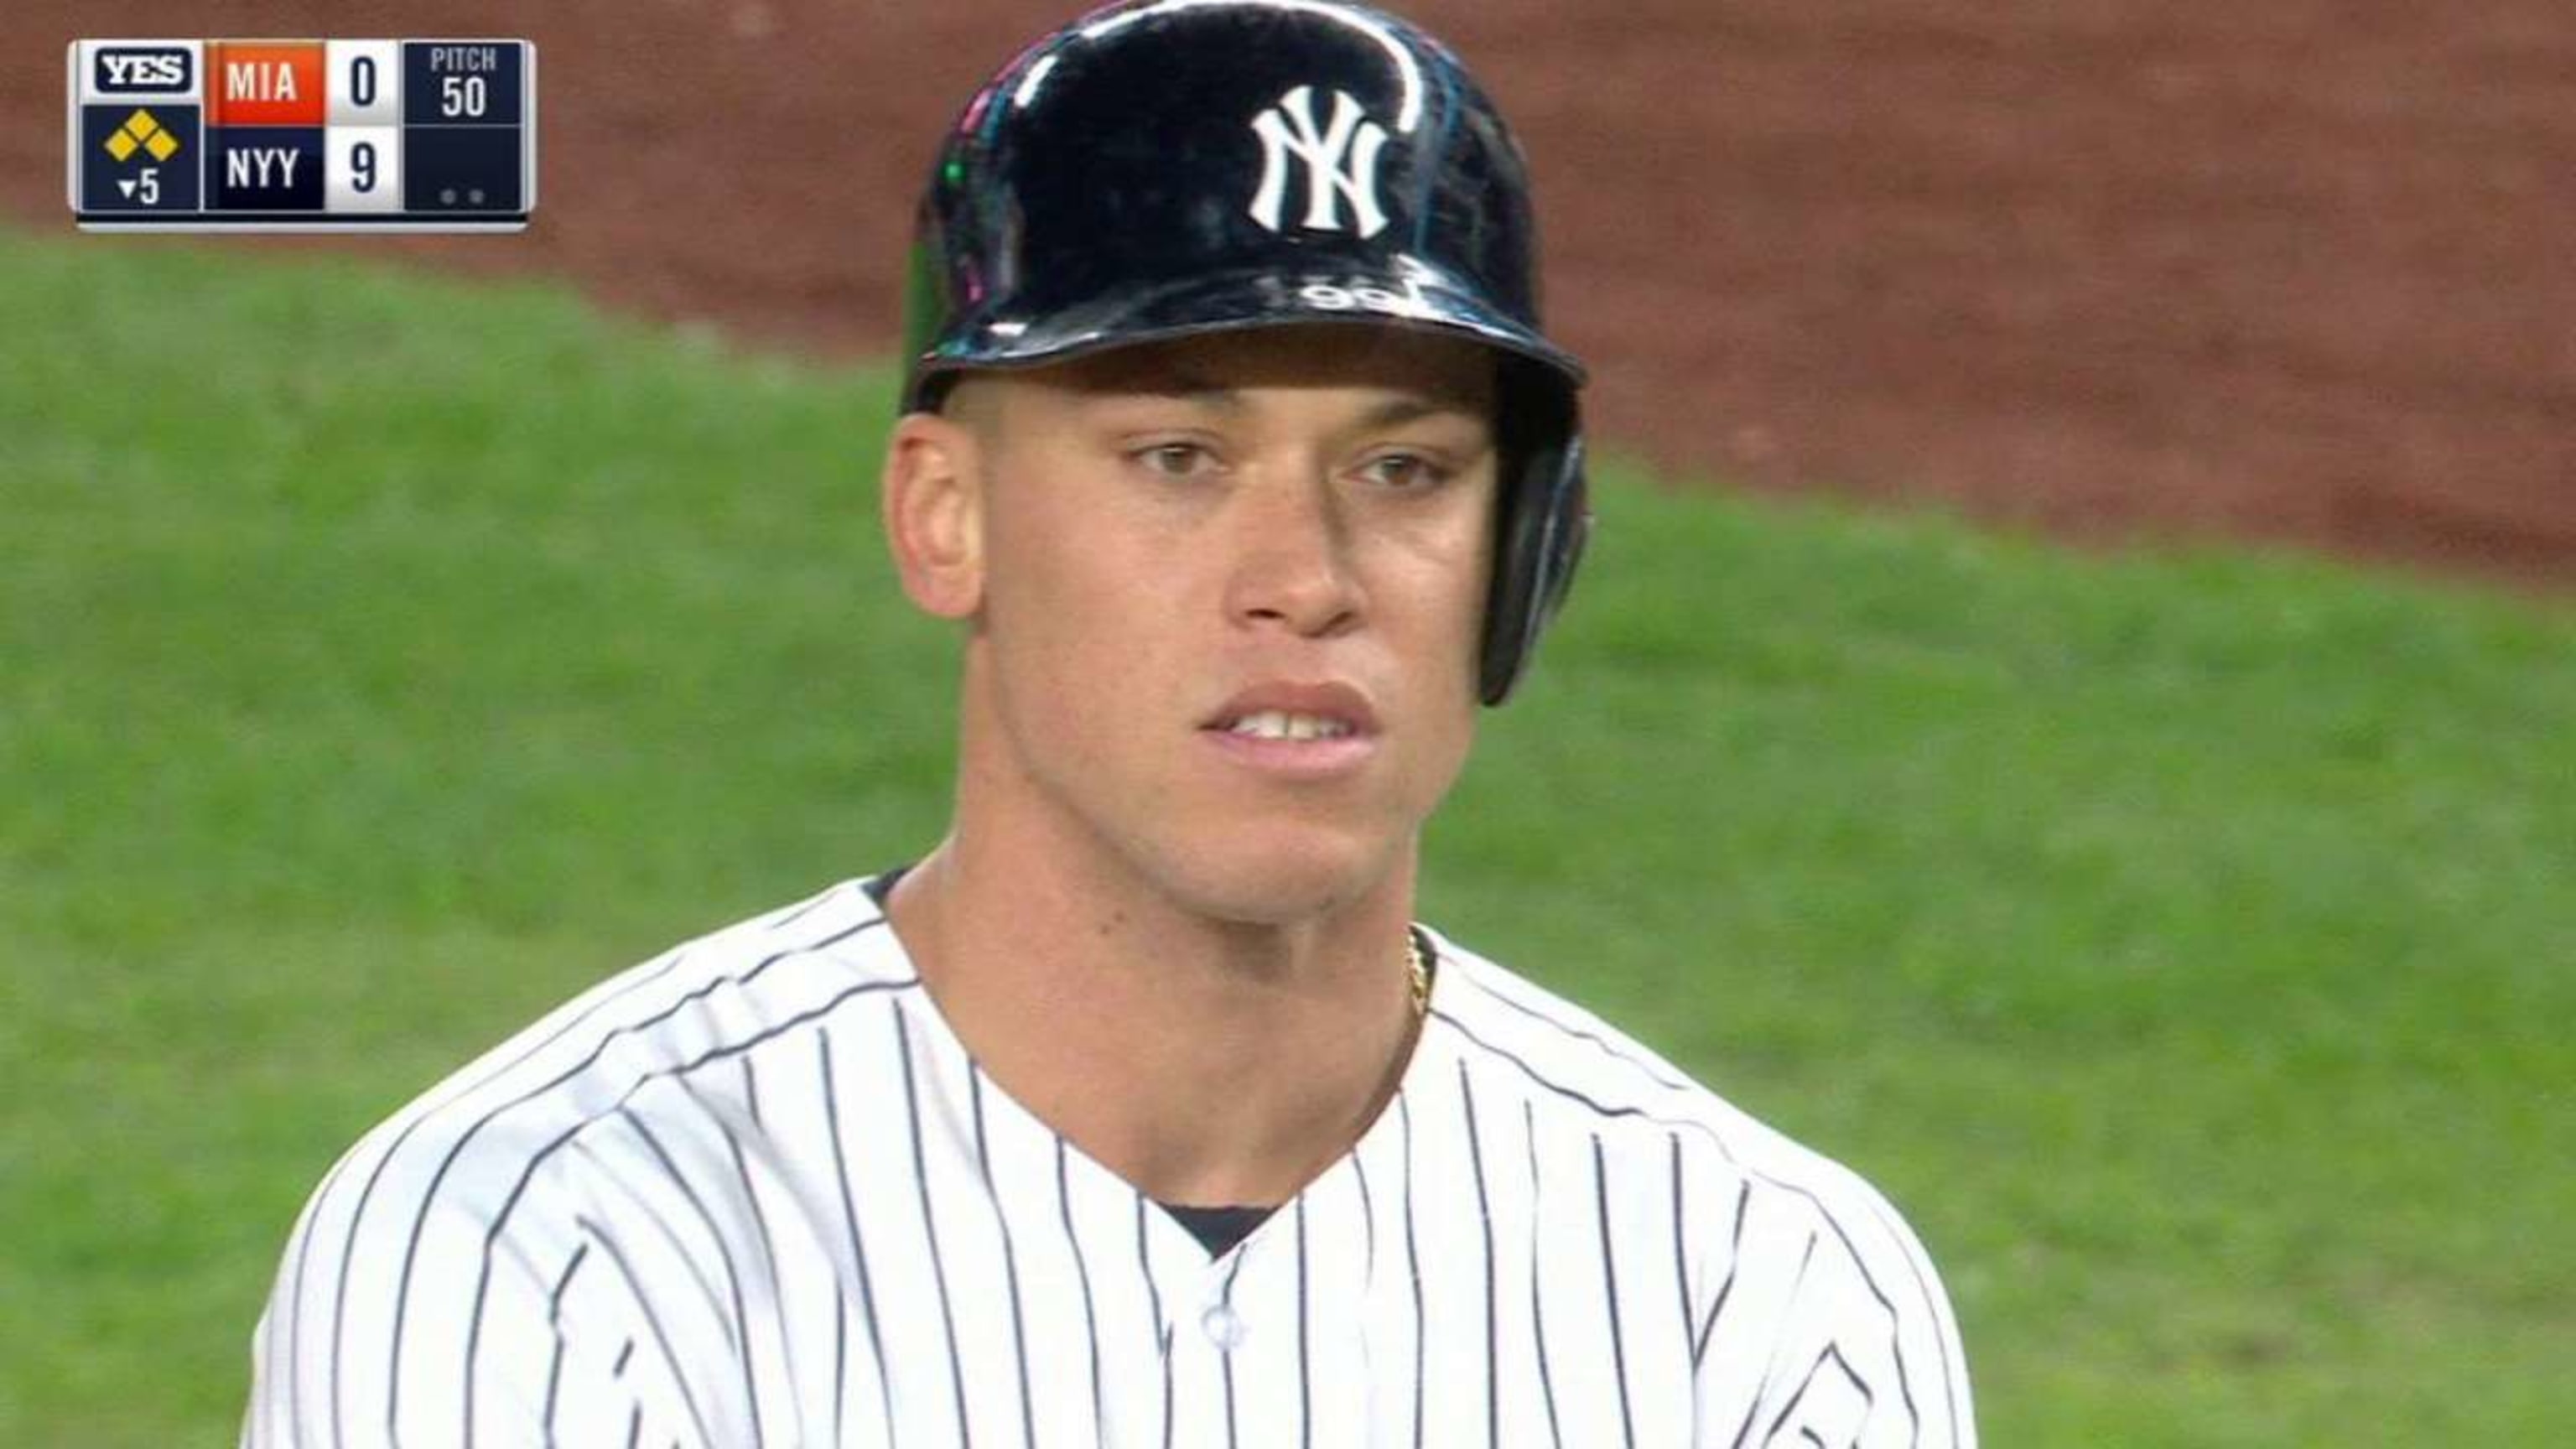 Aaron Judge reached 250 career home runs faster than anyone in